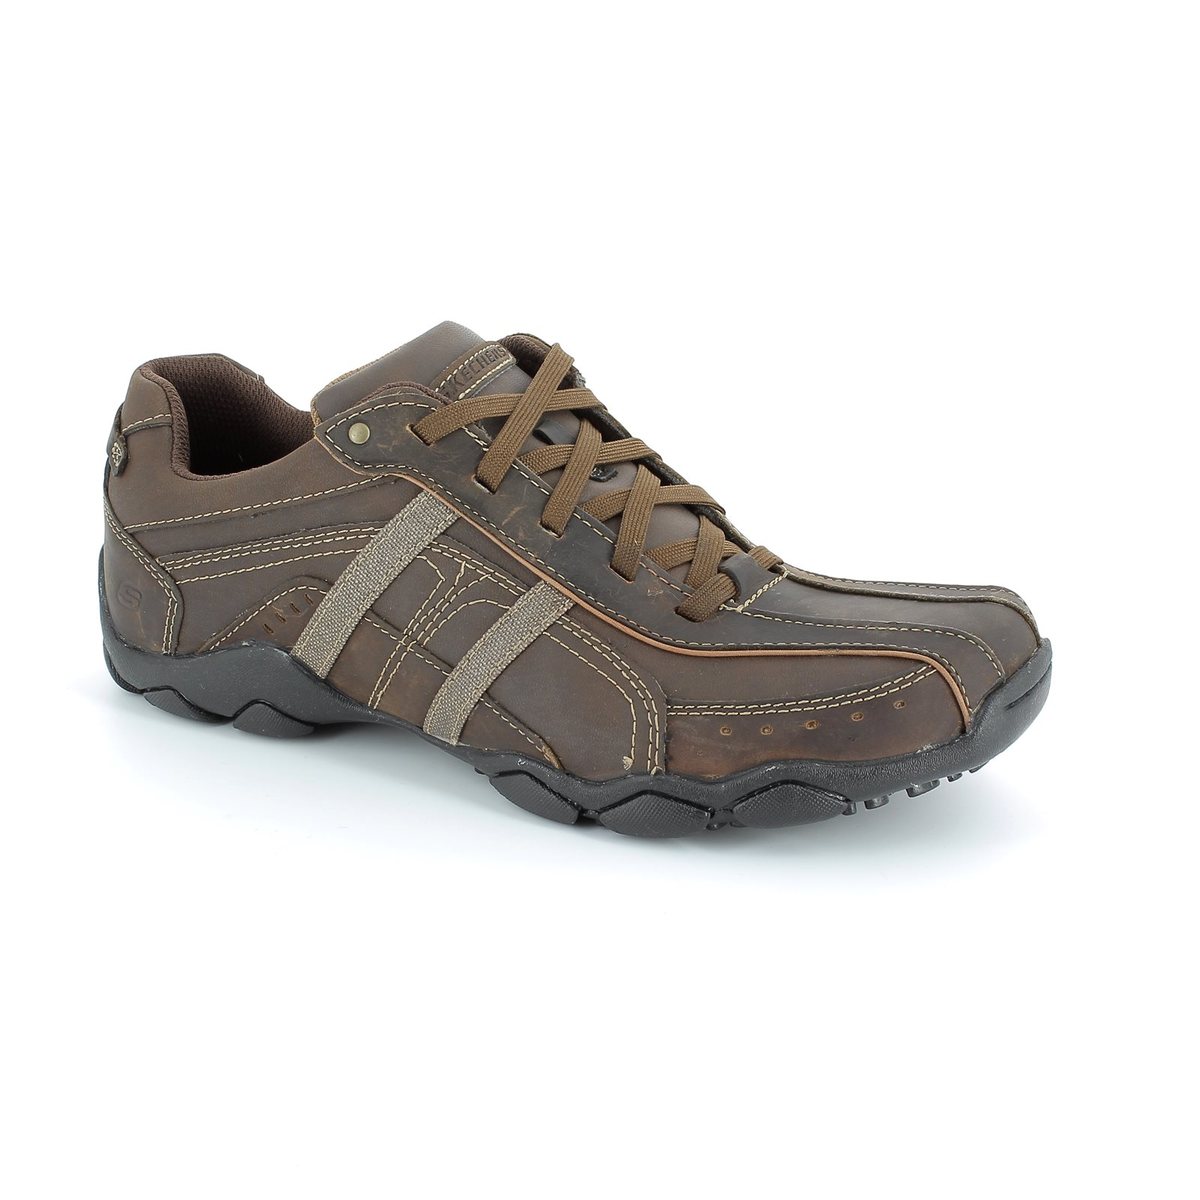 Skechers Murilo Diameter CDB Brown Mens comfort shoes 64276 in a Plain Leather in Size 10.5